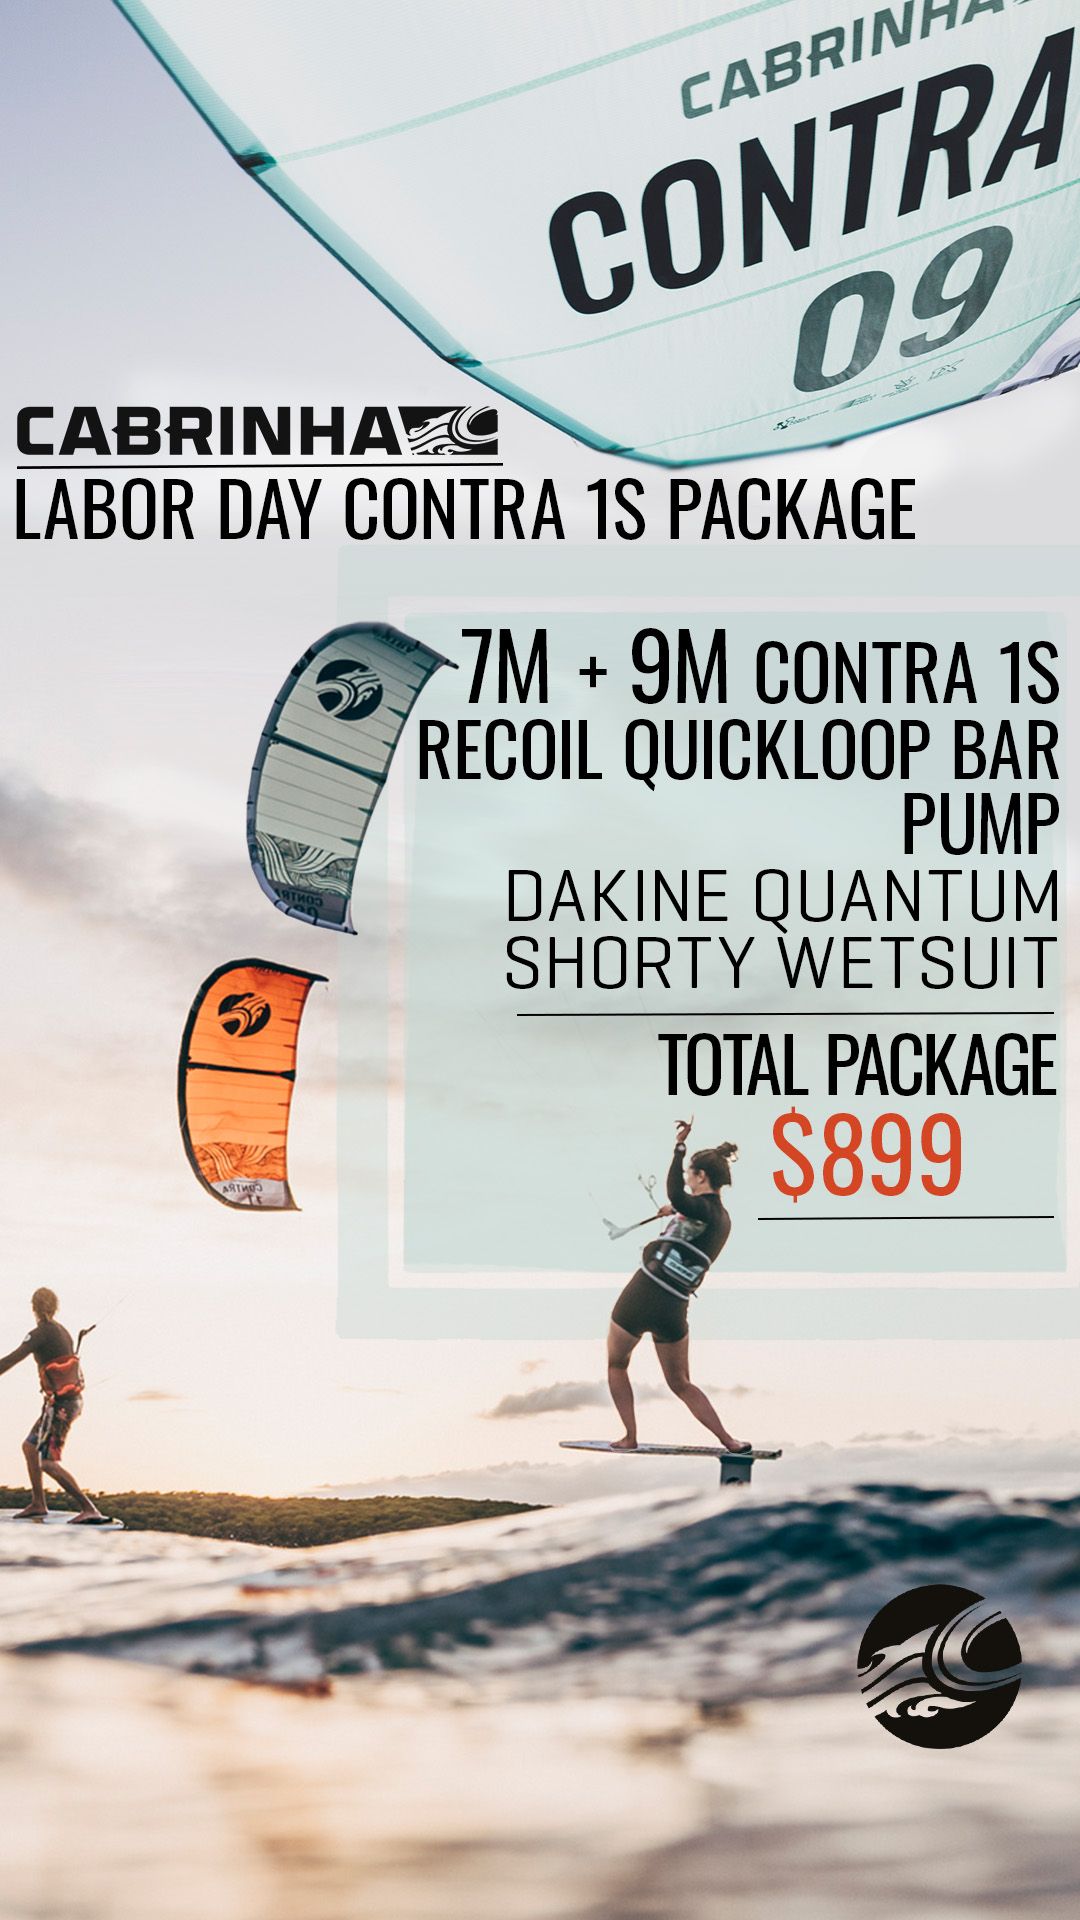 Cabrinha Labor Day Contra 1s Package Deal!